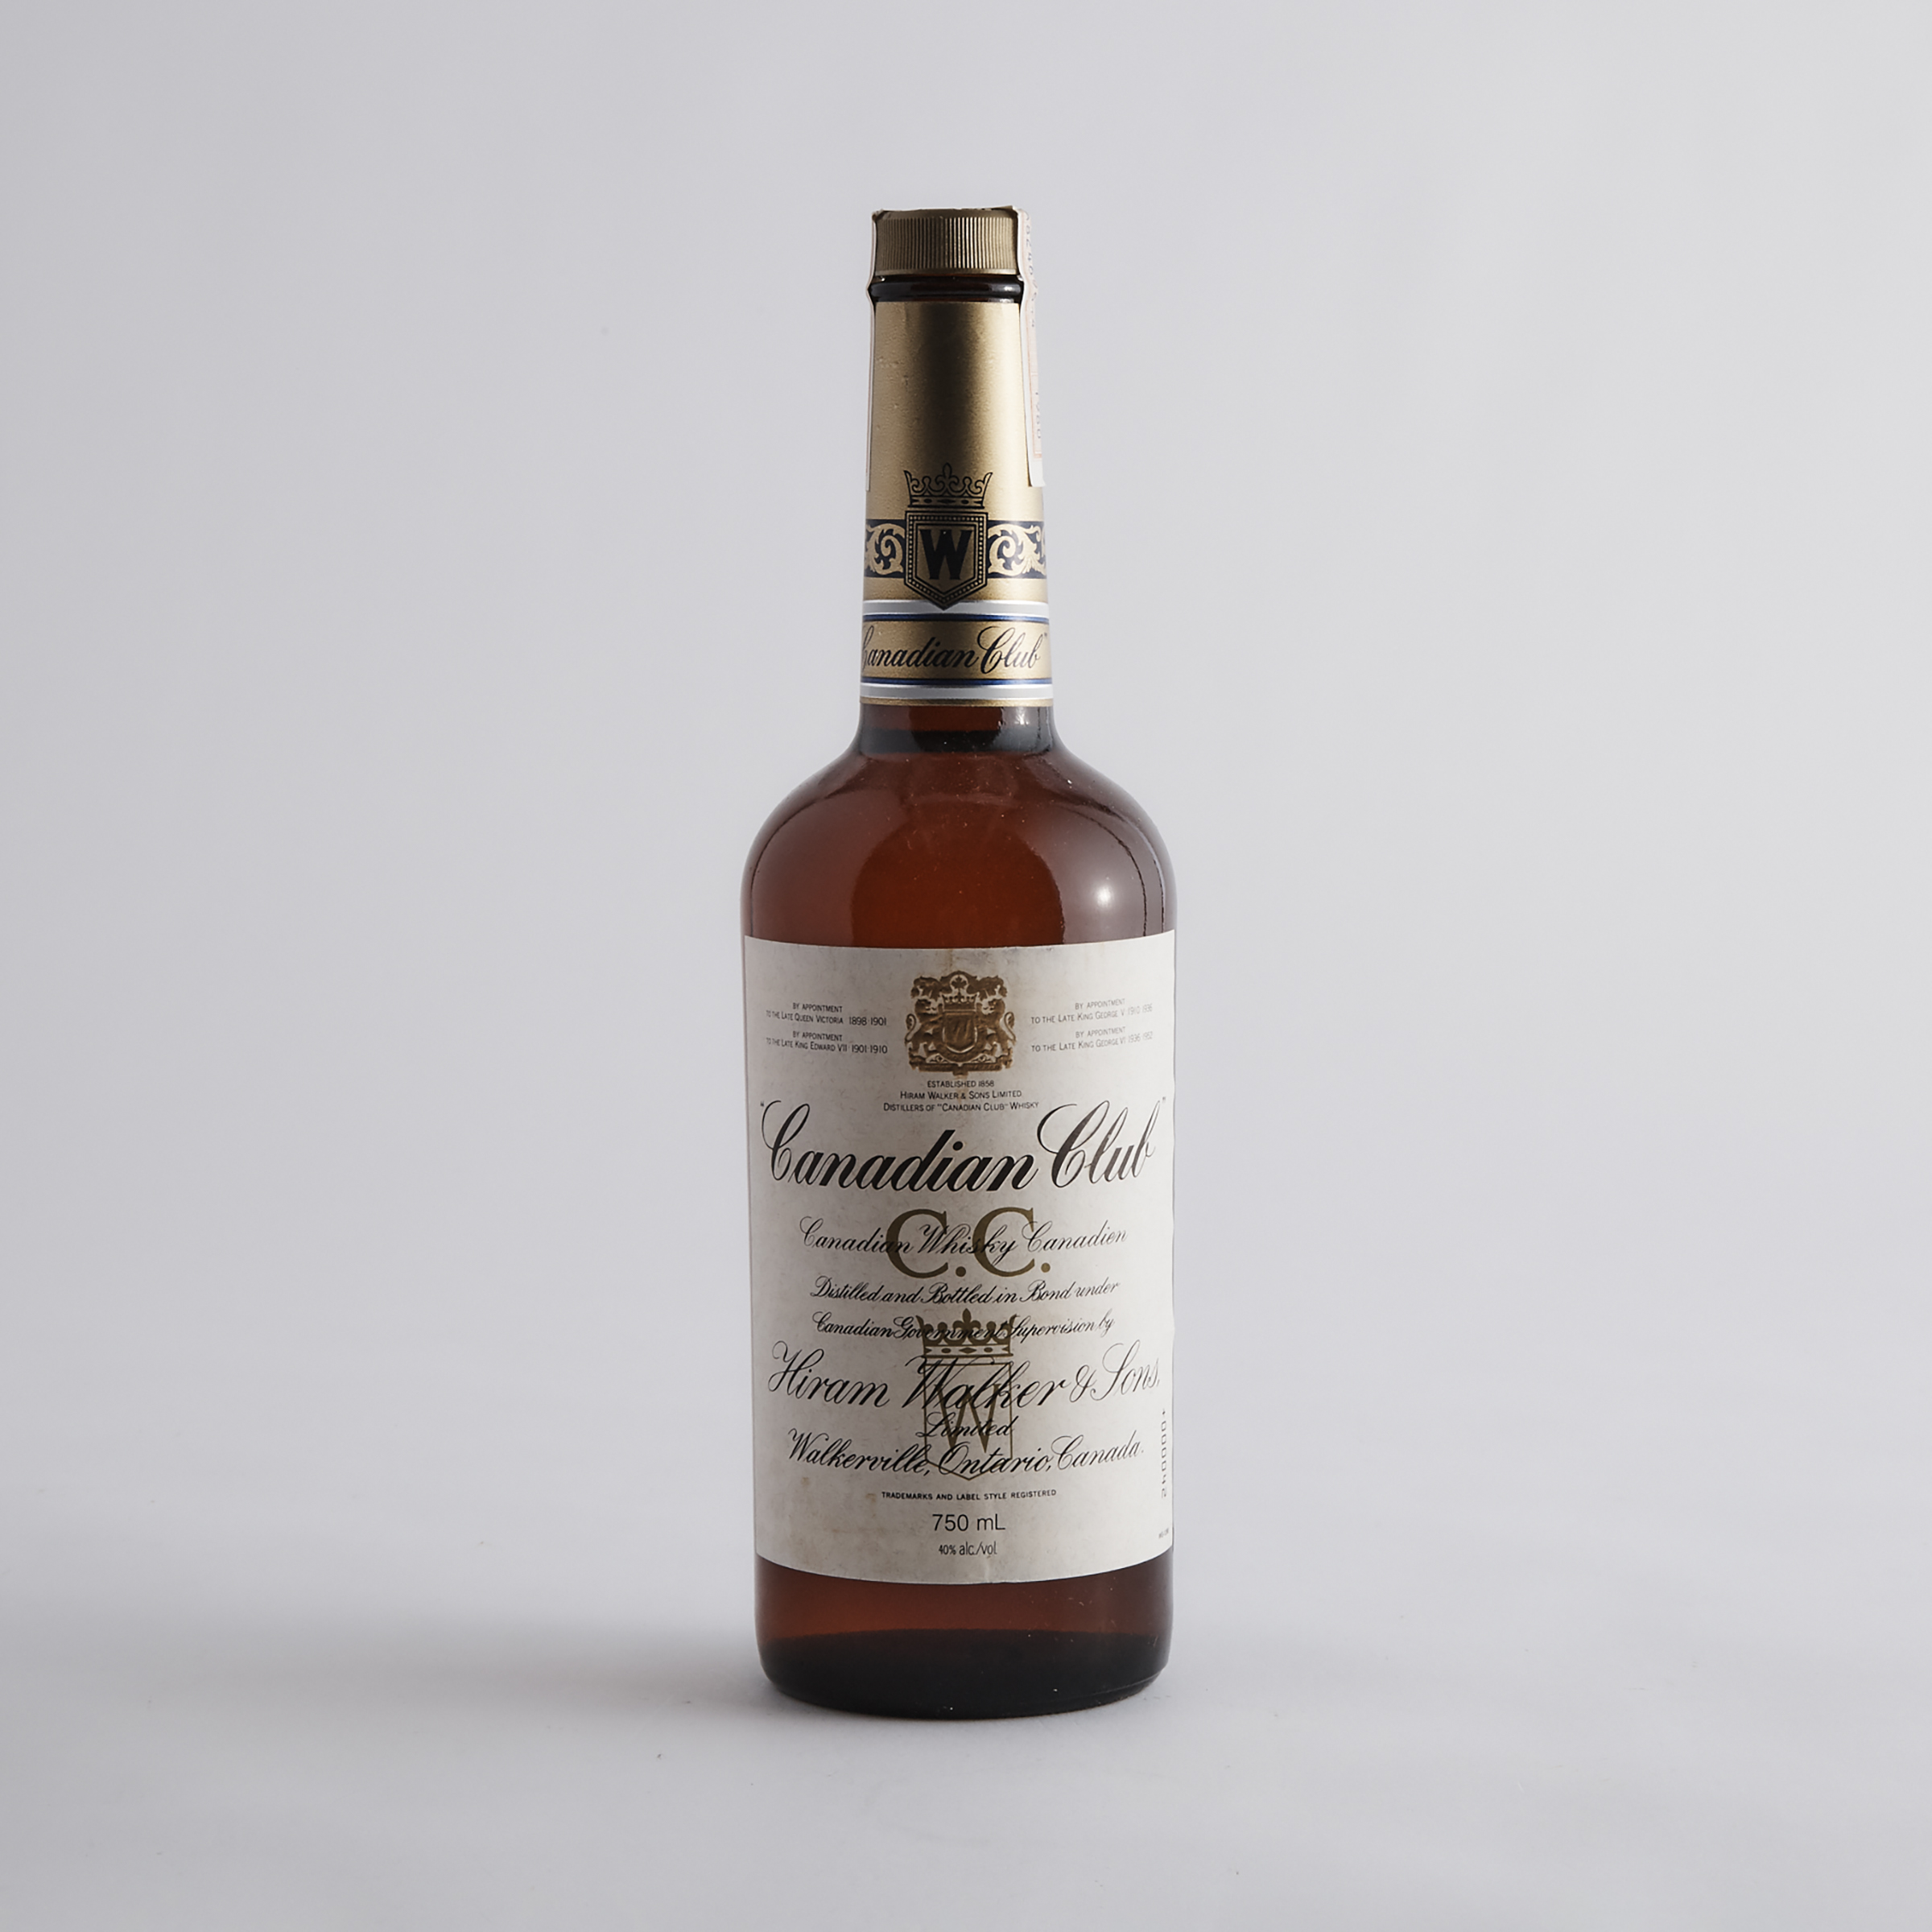 CANADIAN CLUB CANADIAN WHISKY NAS (ONE 750 ML)